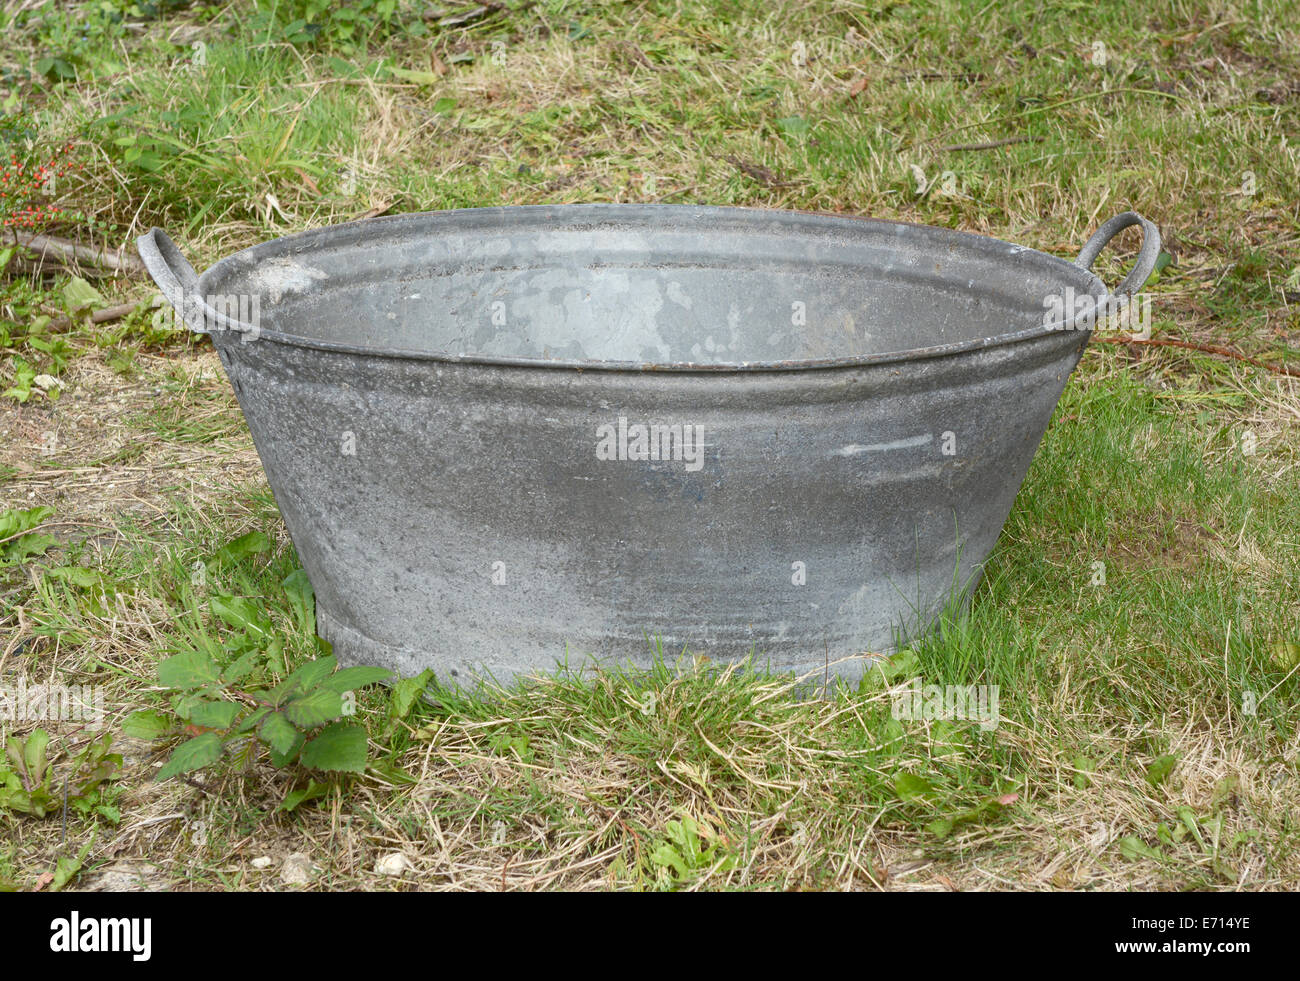 Empty tin bath standing on rough grass and weeds Stock Photo